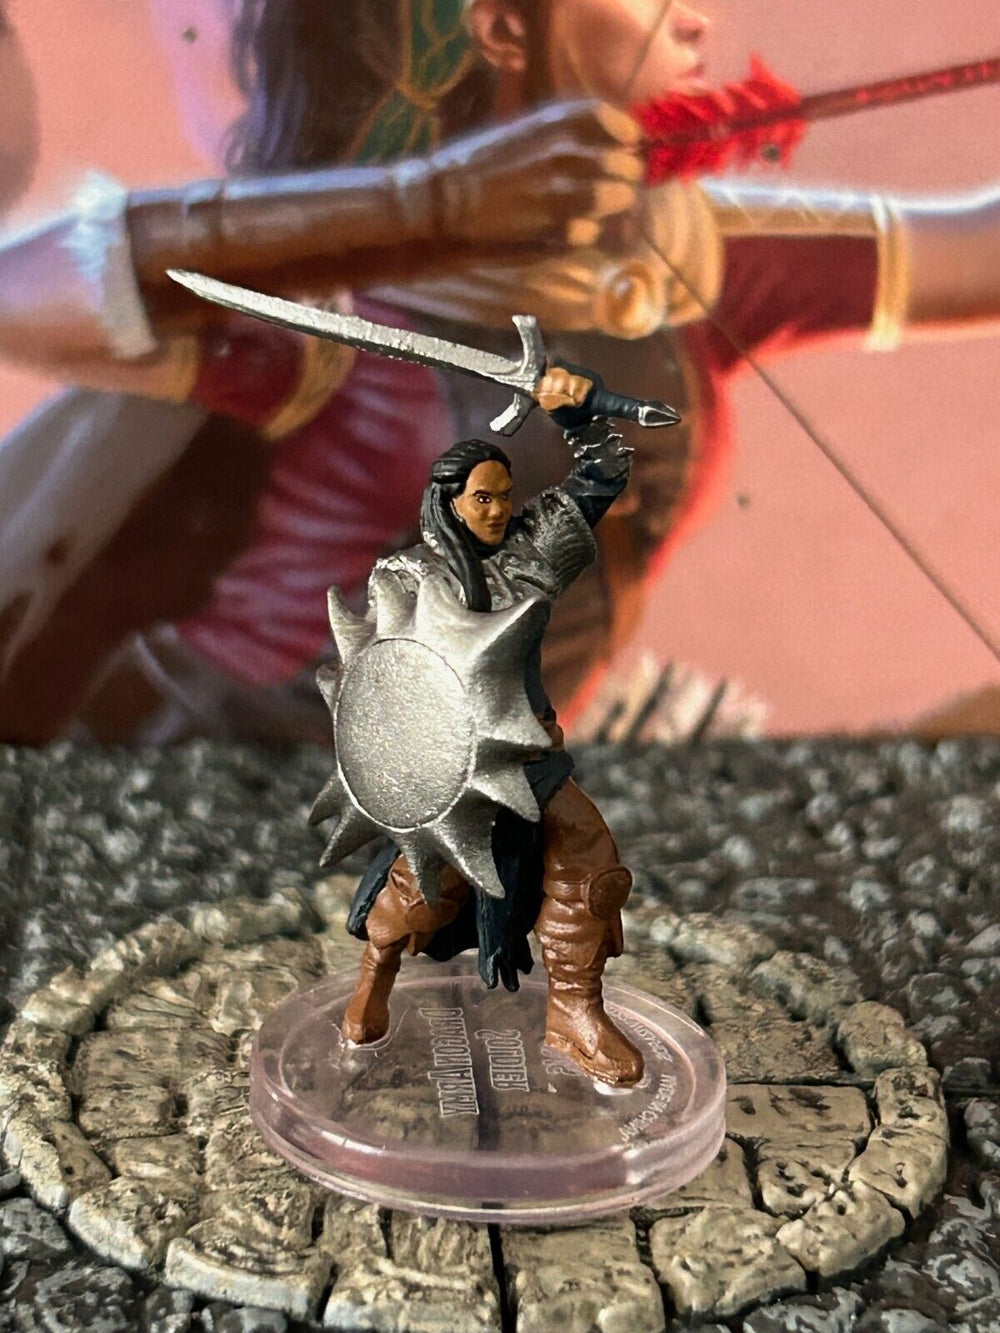 Dragon Army Soldier 1 D&D Miniature Dungeons Dragons Dragonlance fighter knight